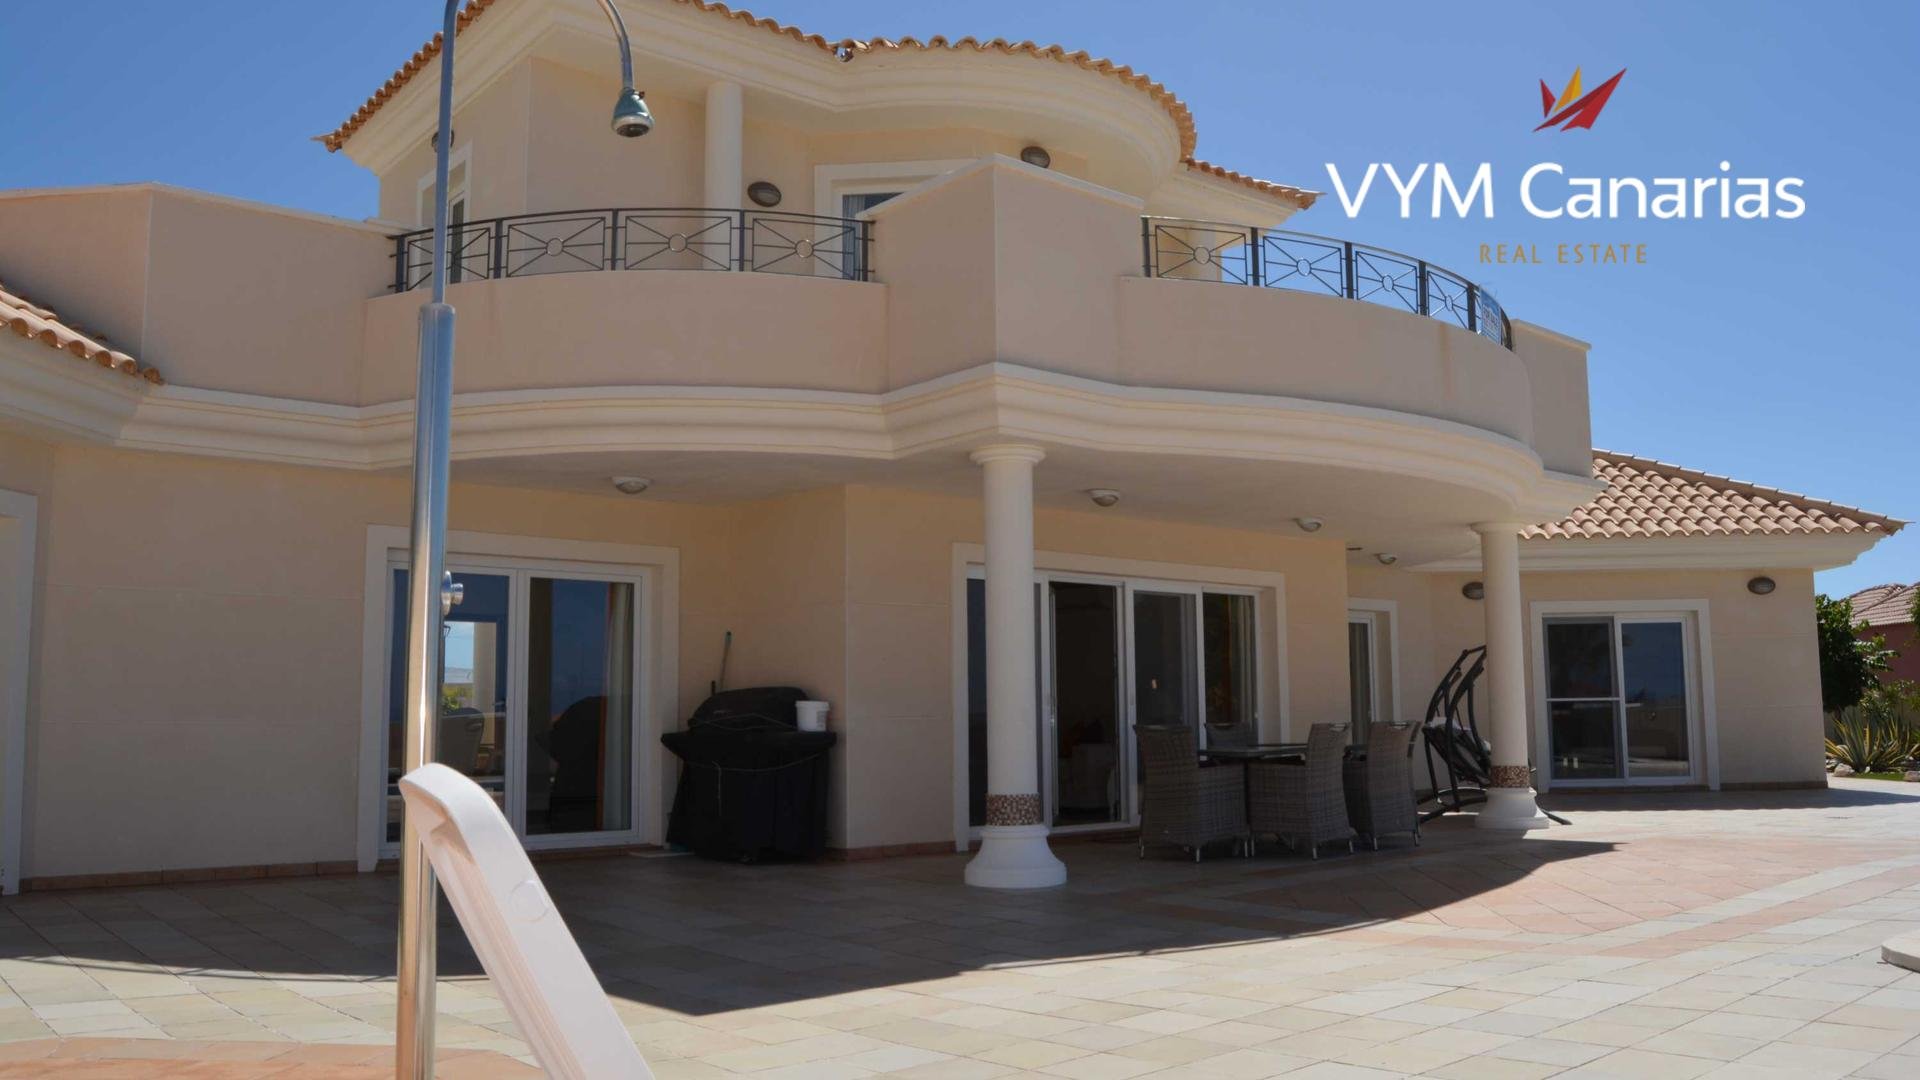 Villa in Playa Paraiso marketed by Vym Canarias